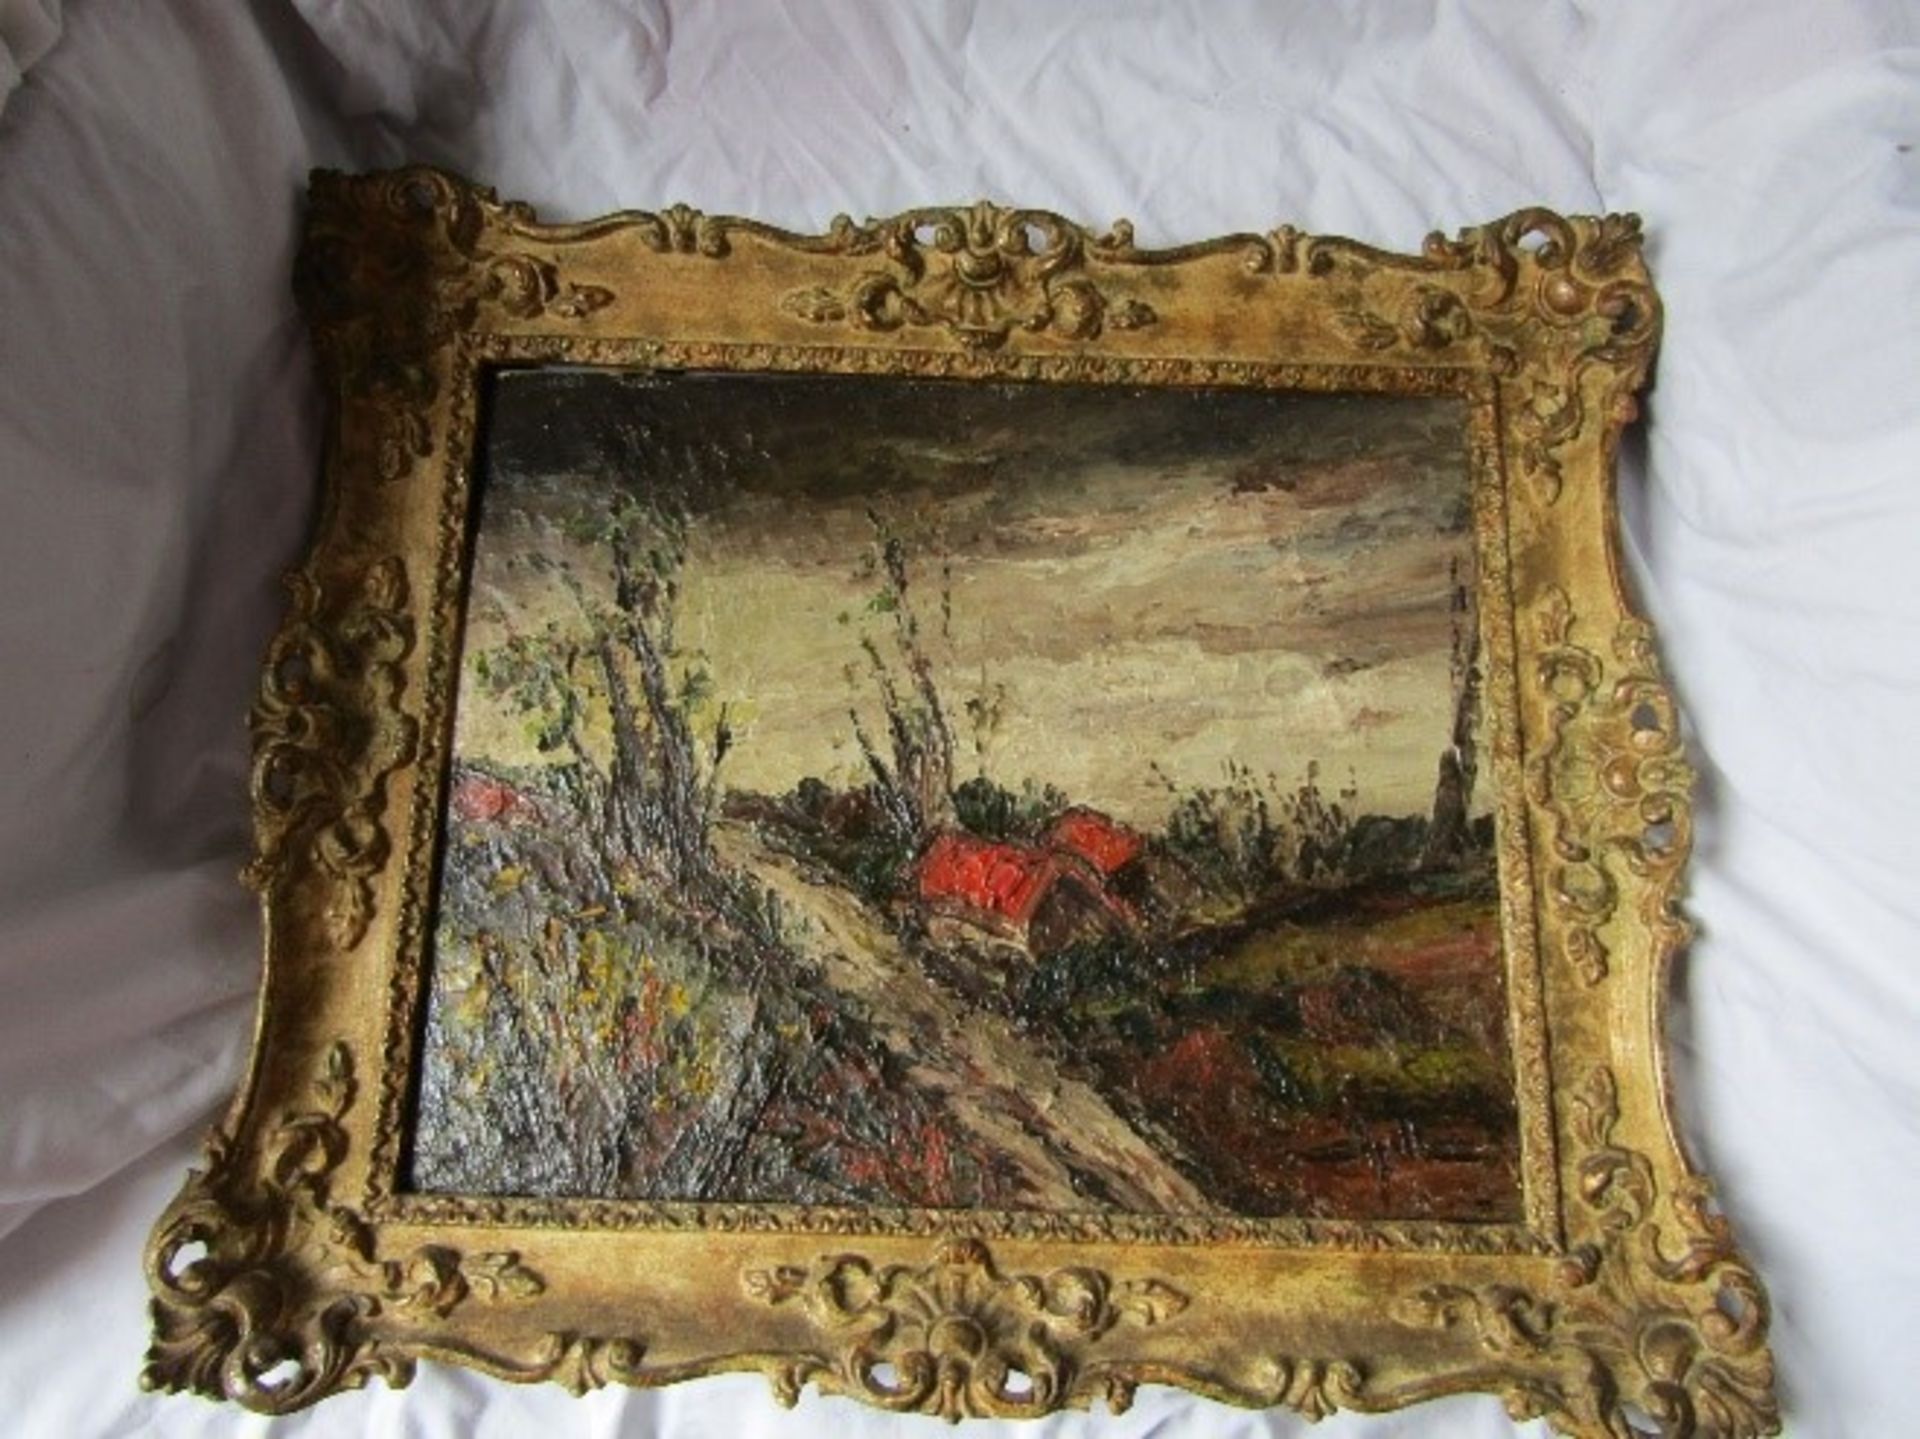 20th Century French school oil on canvas, indistinctly signed lower right, 12 ¾’ x 15 ¾’